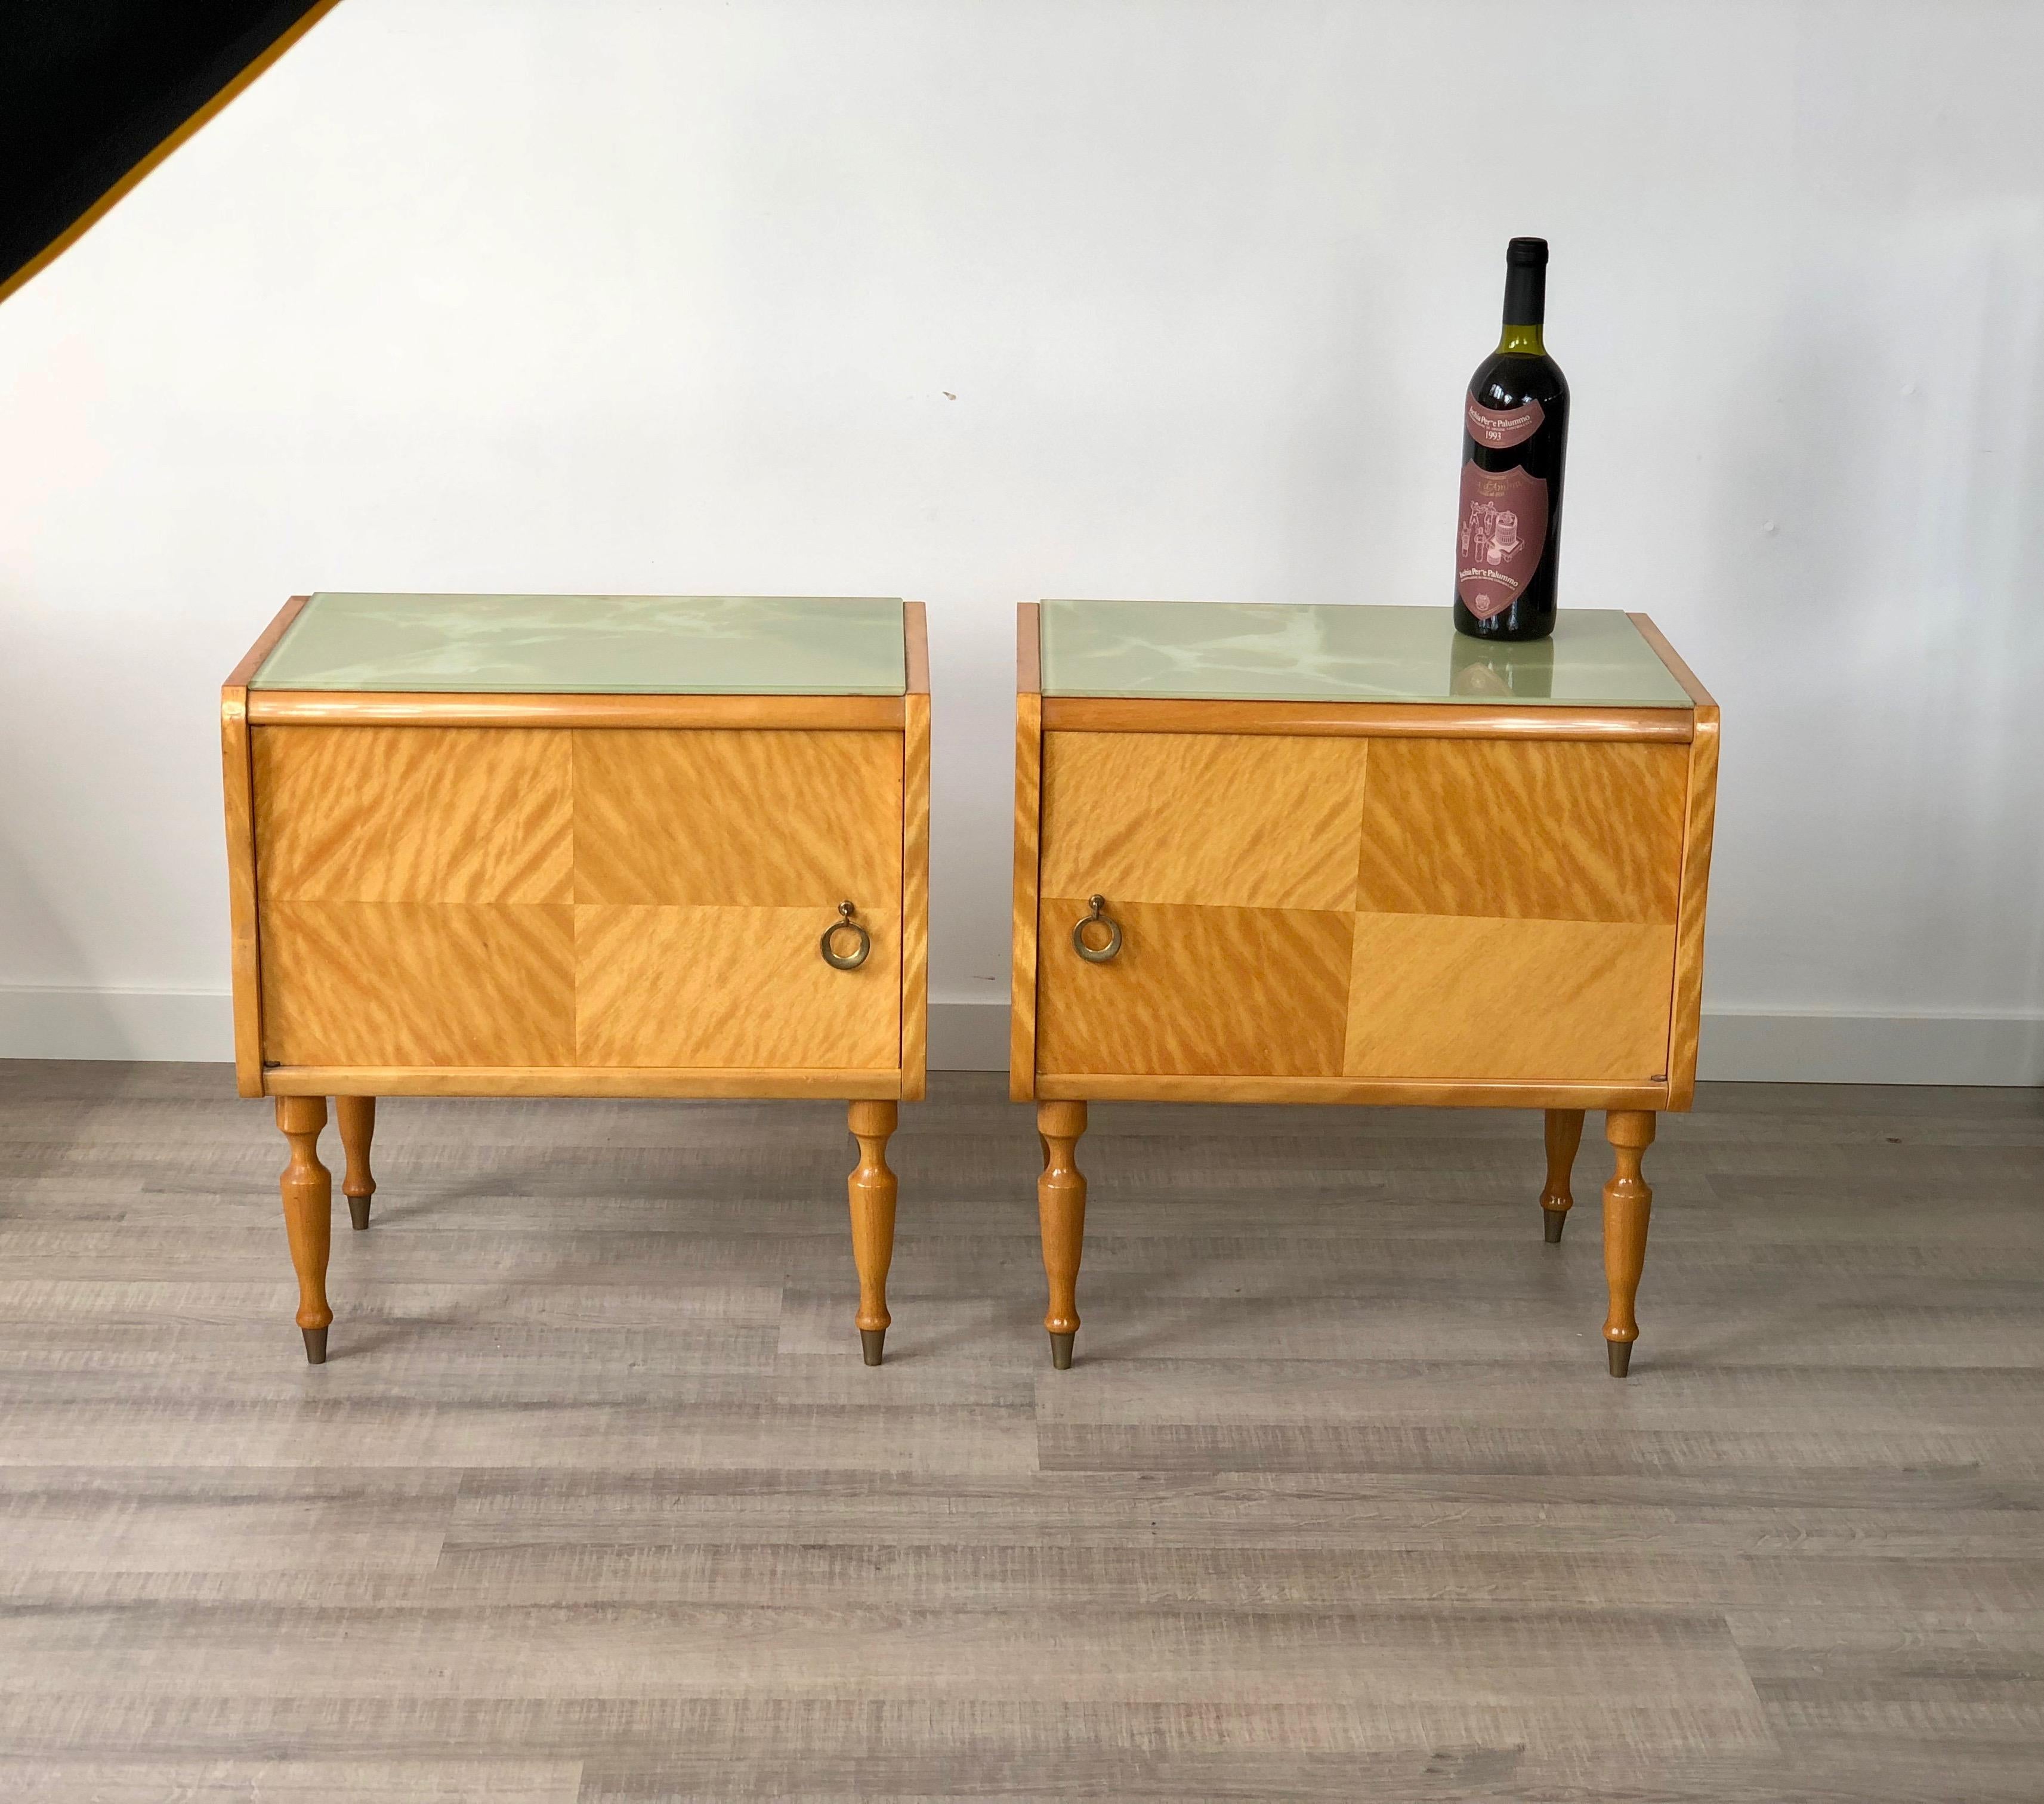 Italian Pair of Wood Lacquered Side Table Nightstands Vittorio Dassi style, 1950s, Italy